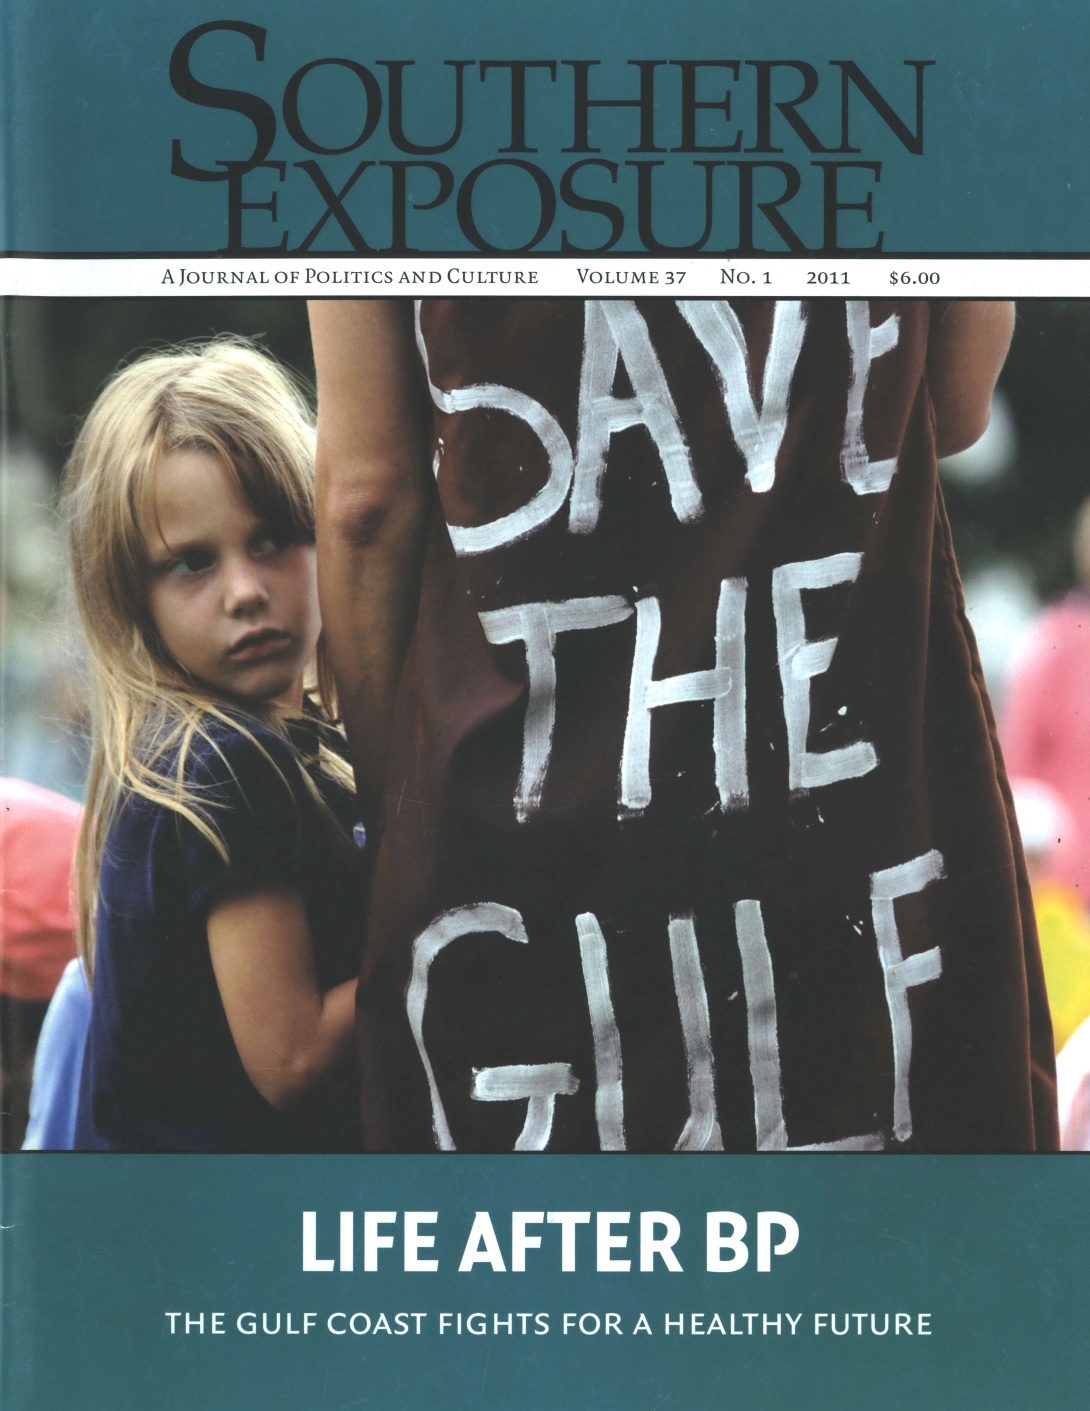 Magazine cover with photo of young girl holding on to woman whose shirt reads "Save the Gulf." Cover text reads "Life After BP: The Gulf Coast Fights for a Healthy Future"